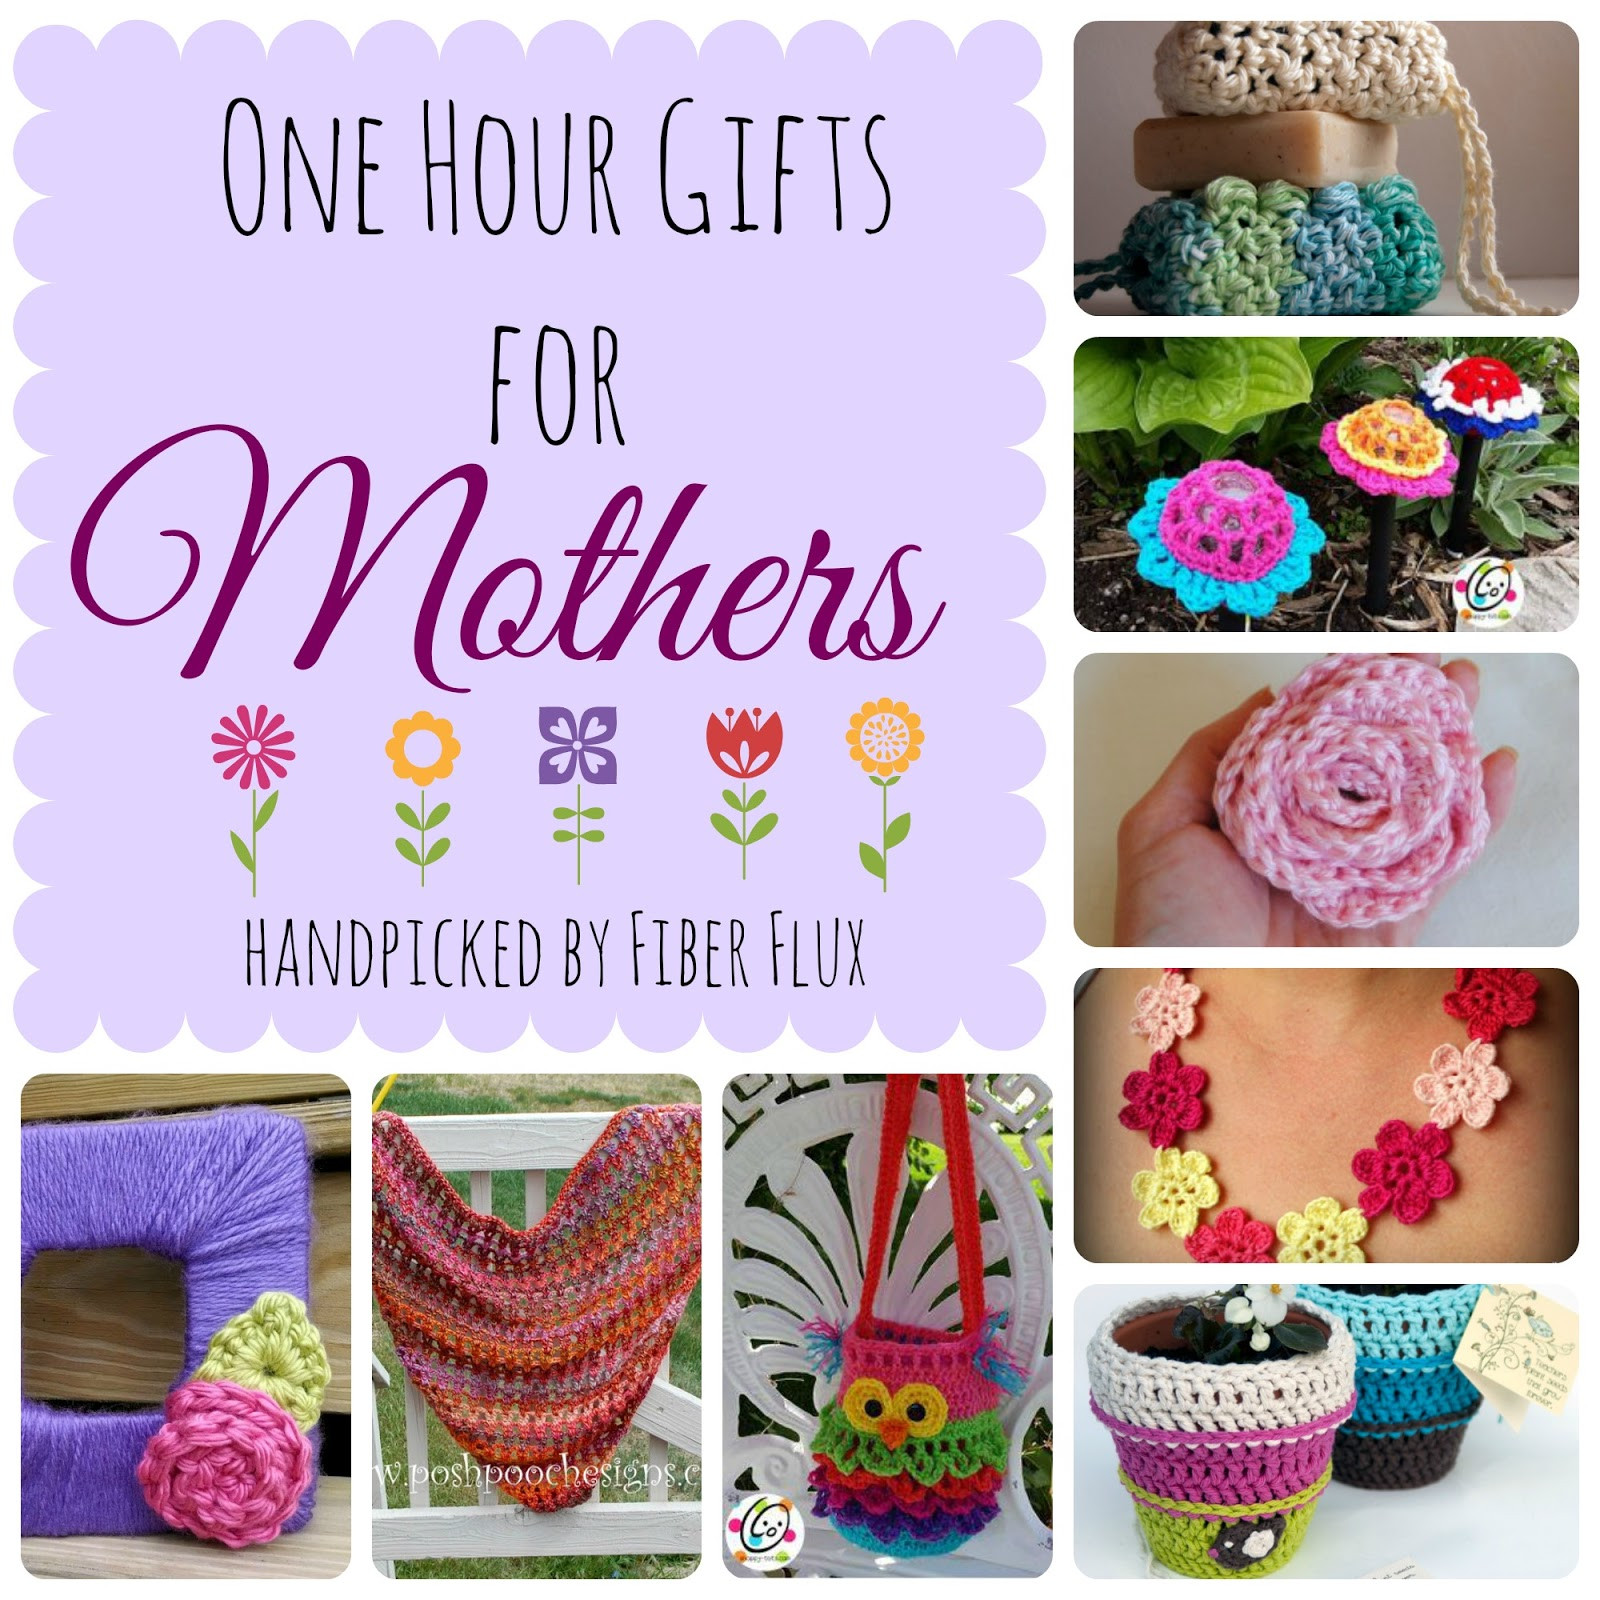 Mother'S Day Crochet Gift Ideas
 Fiber Flux e Hour Gifts for Mothers